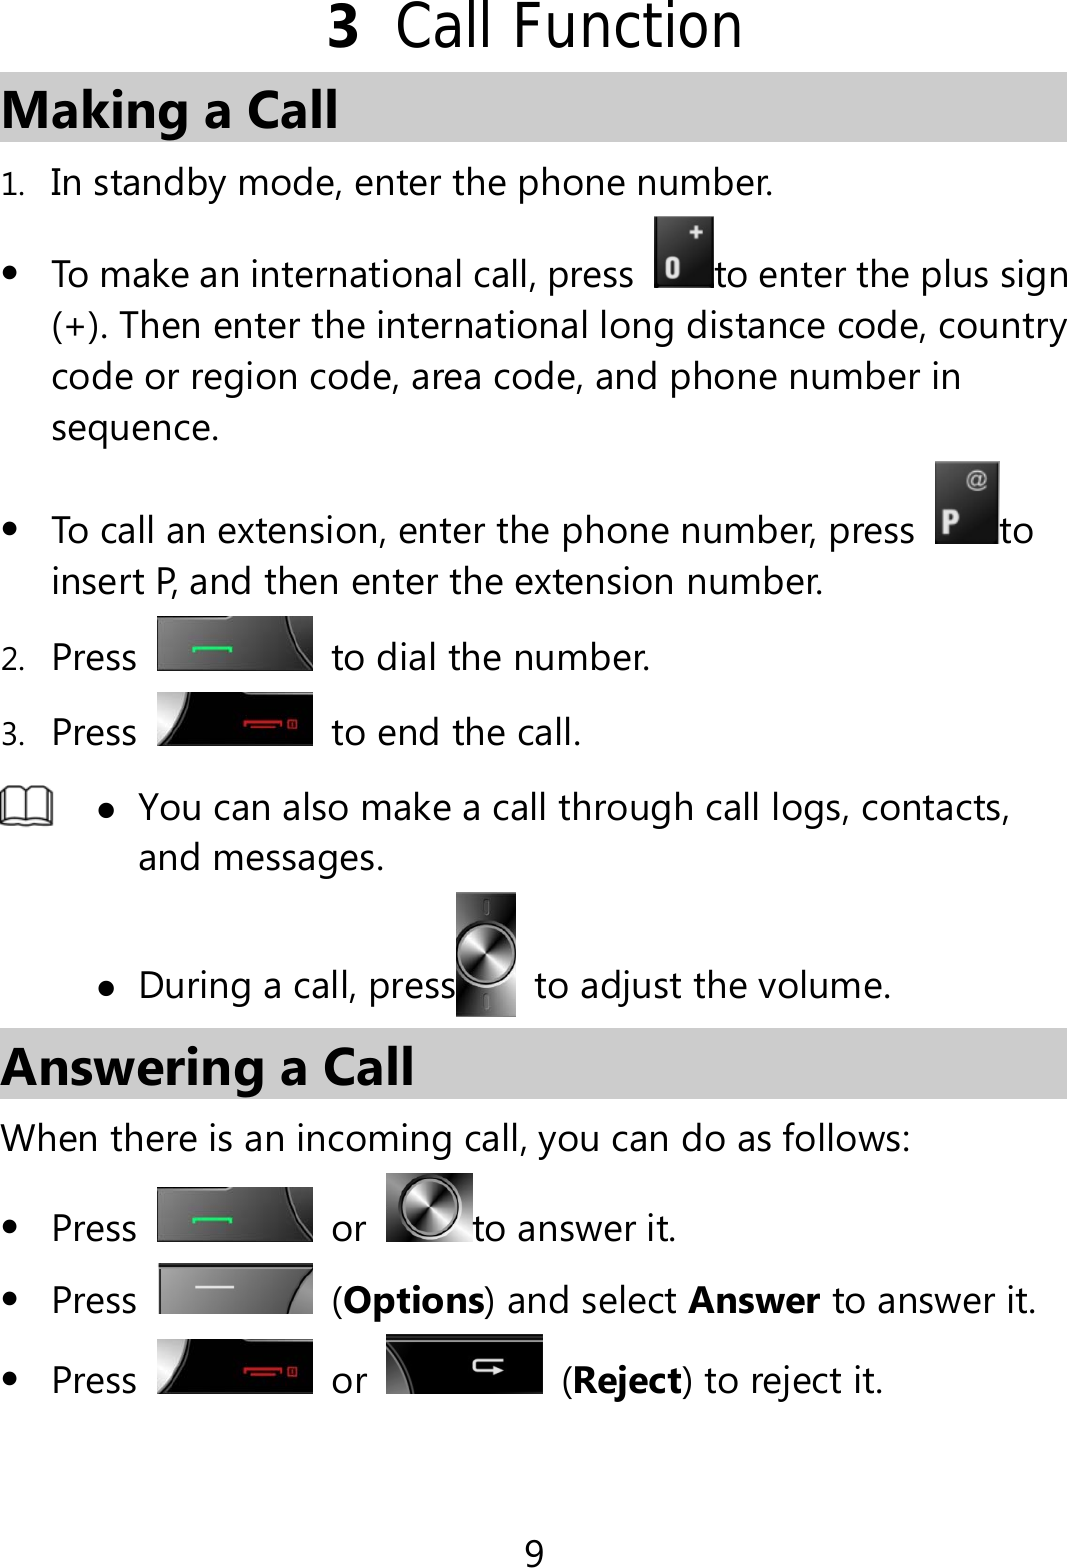 9 3  Call Function Making a Call 1. In standby mode, enter the phone number.  To make an international call, press  to enter the plus sign (+). Then enter the international long distance code, country code or region code, area code, and phone number in sequence.  To call an extension, enter the phone number, press to insert P, and then enter the extension number. 2. Press   to dial the number. 3. Press   to end the call.   You can also make a call through call logs, contacts, and messages.  During a call, press to adjust the volume. Answering a Call When there is an incoming call, you can do as follows:  Press  or  to answer it.  Press   (Options) and select Answer to answer it.  Press   or   (Reject) to reject it.  